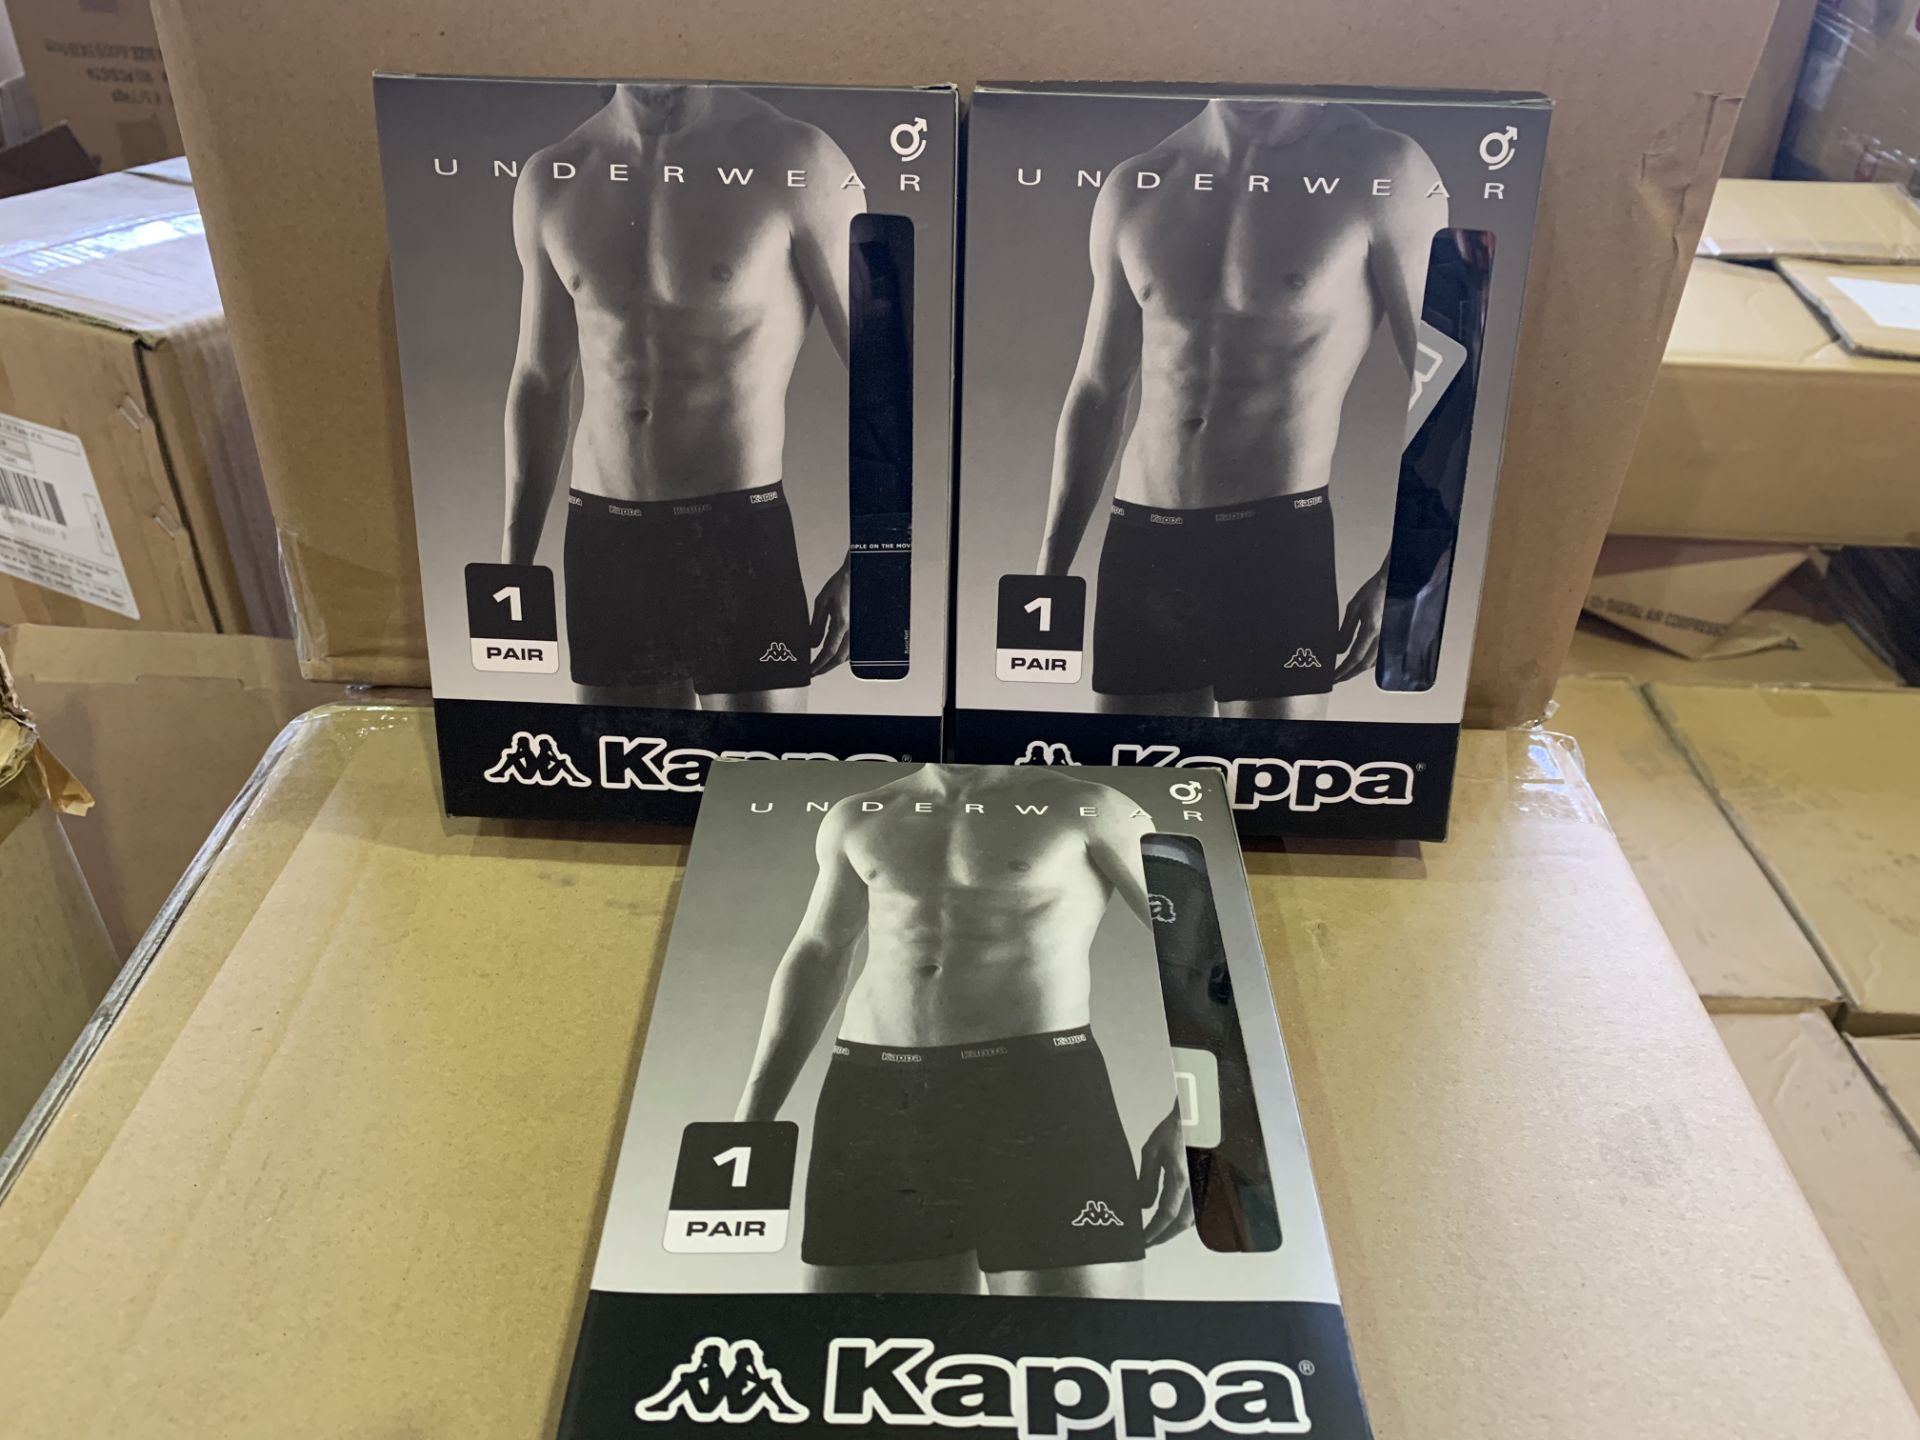 20 X BRAND NEW KAPPA RETAIL PACKAGED BOXER SHORTS (4 X S, 8 X M, 6 X L, 2 X XL) IN 2 BOXES